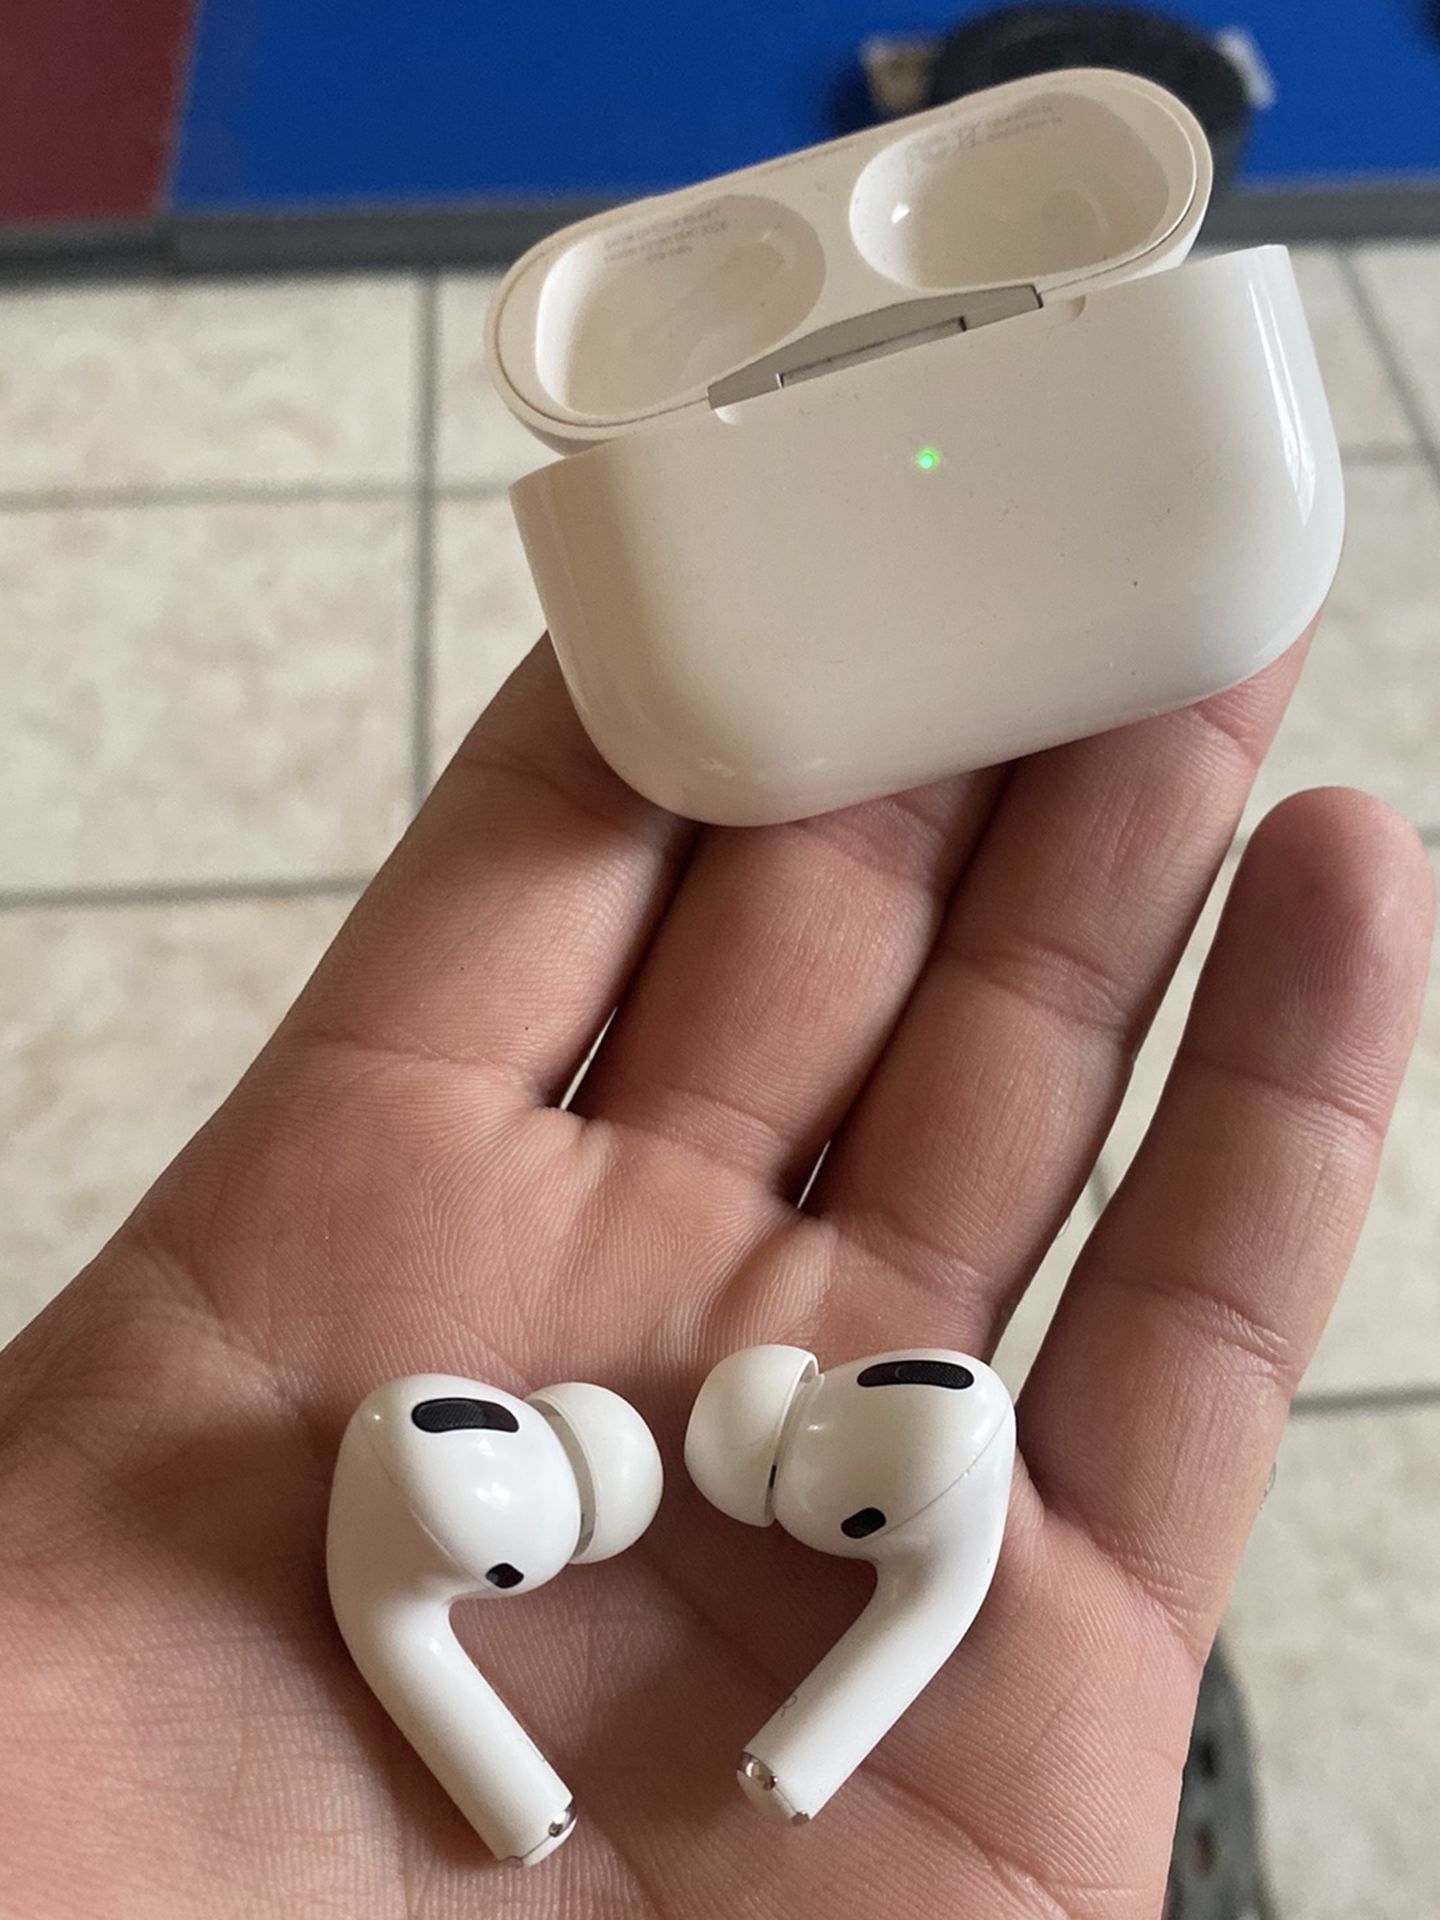 AirPod Pros with Charging Case (right airpod Is Scratchy But The Left One Works Fine)